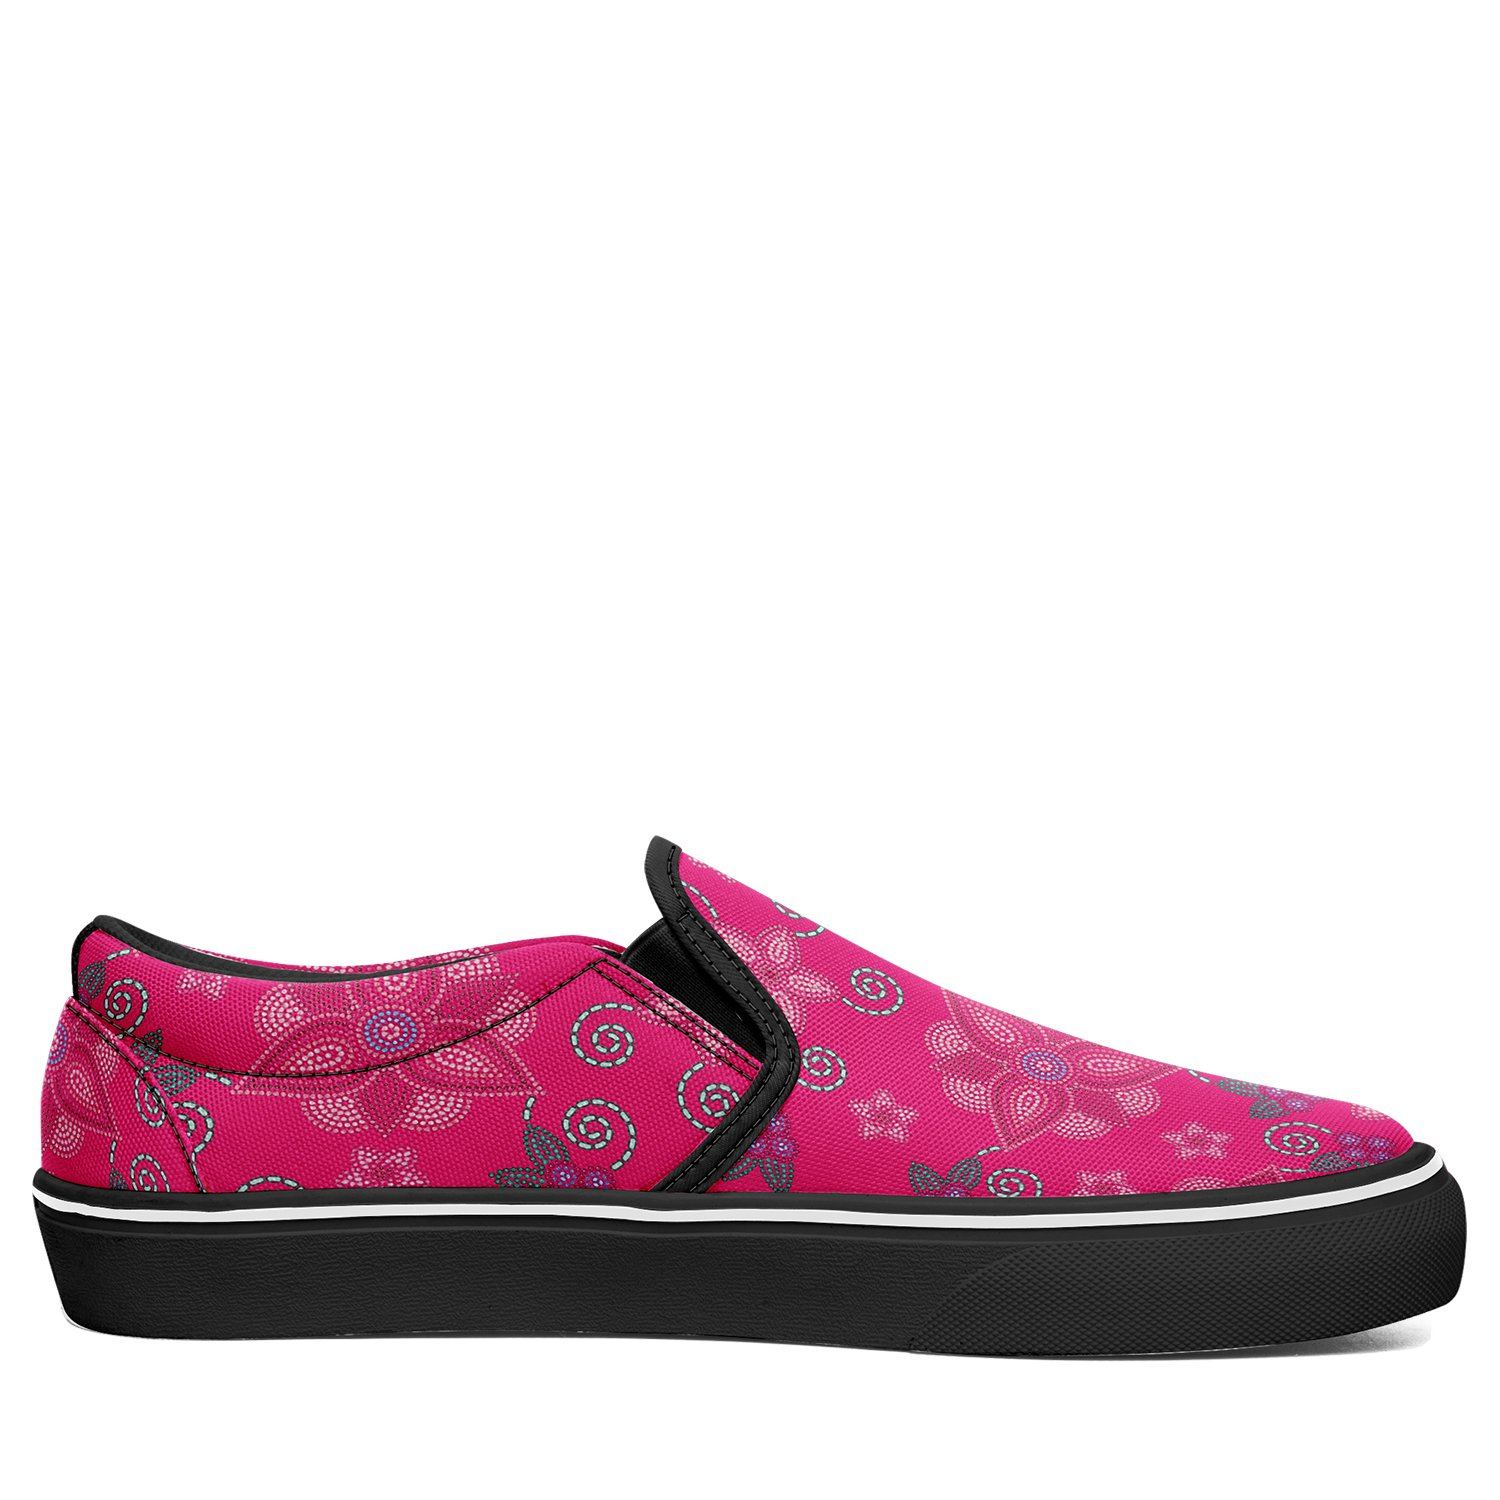 Otoyimm Kids Canvas On Slip Shoes